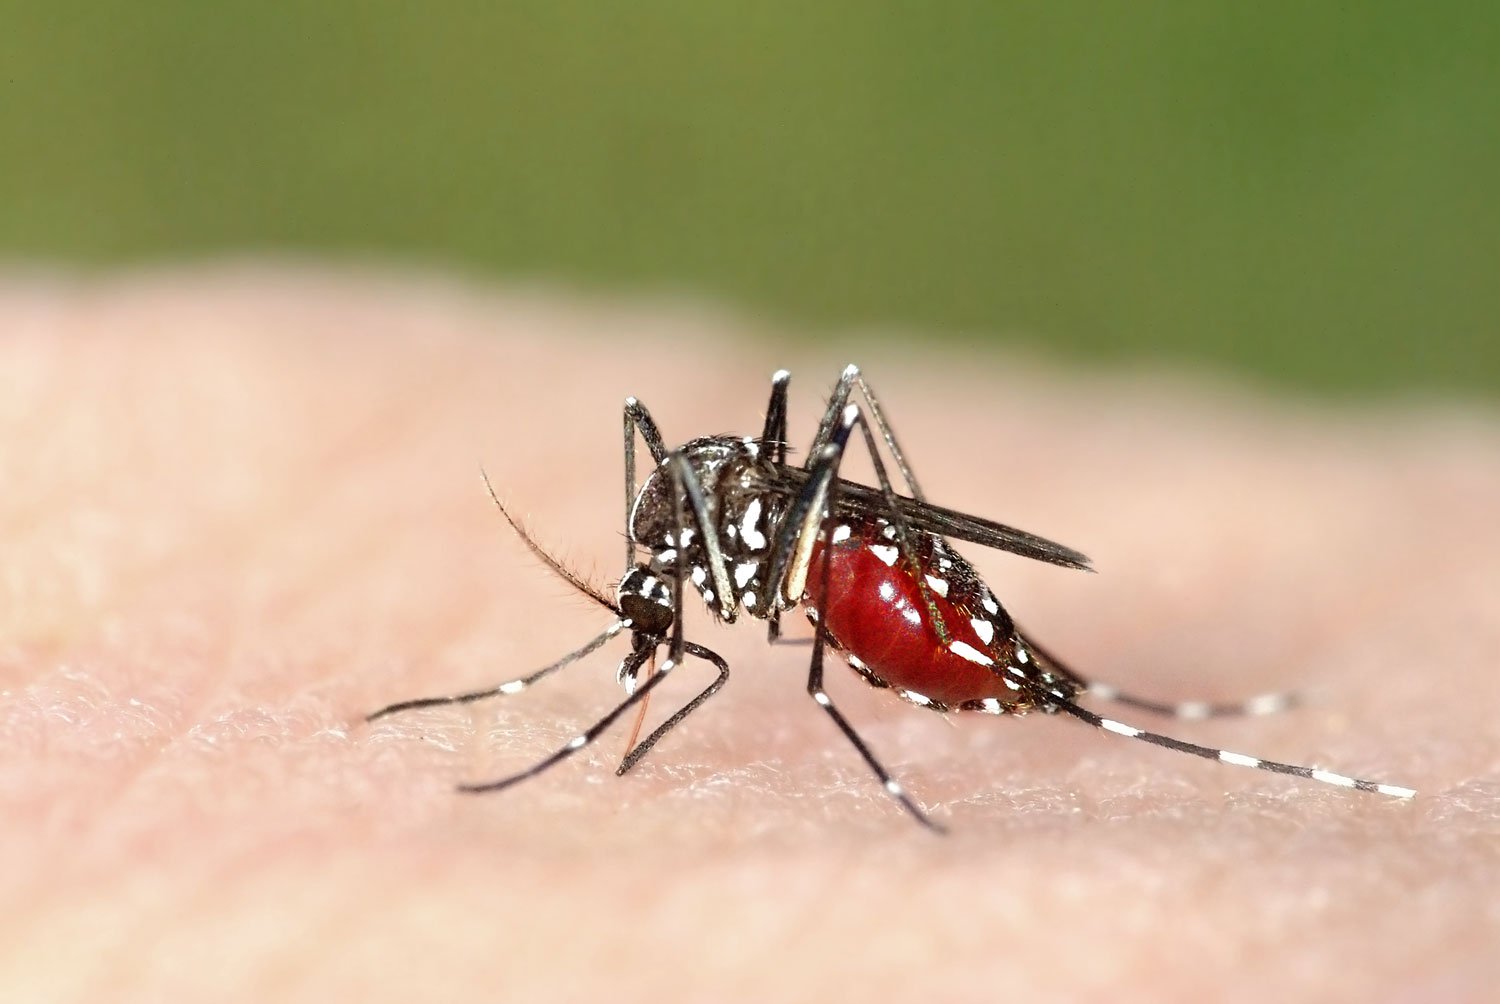 Do mosquitoes play a role in ecosystem?